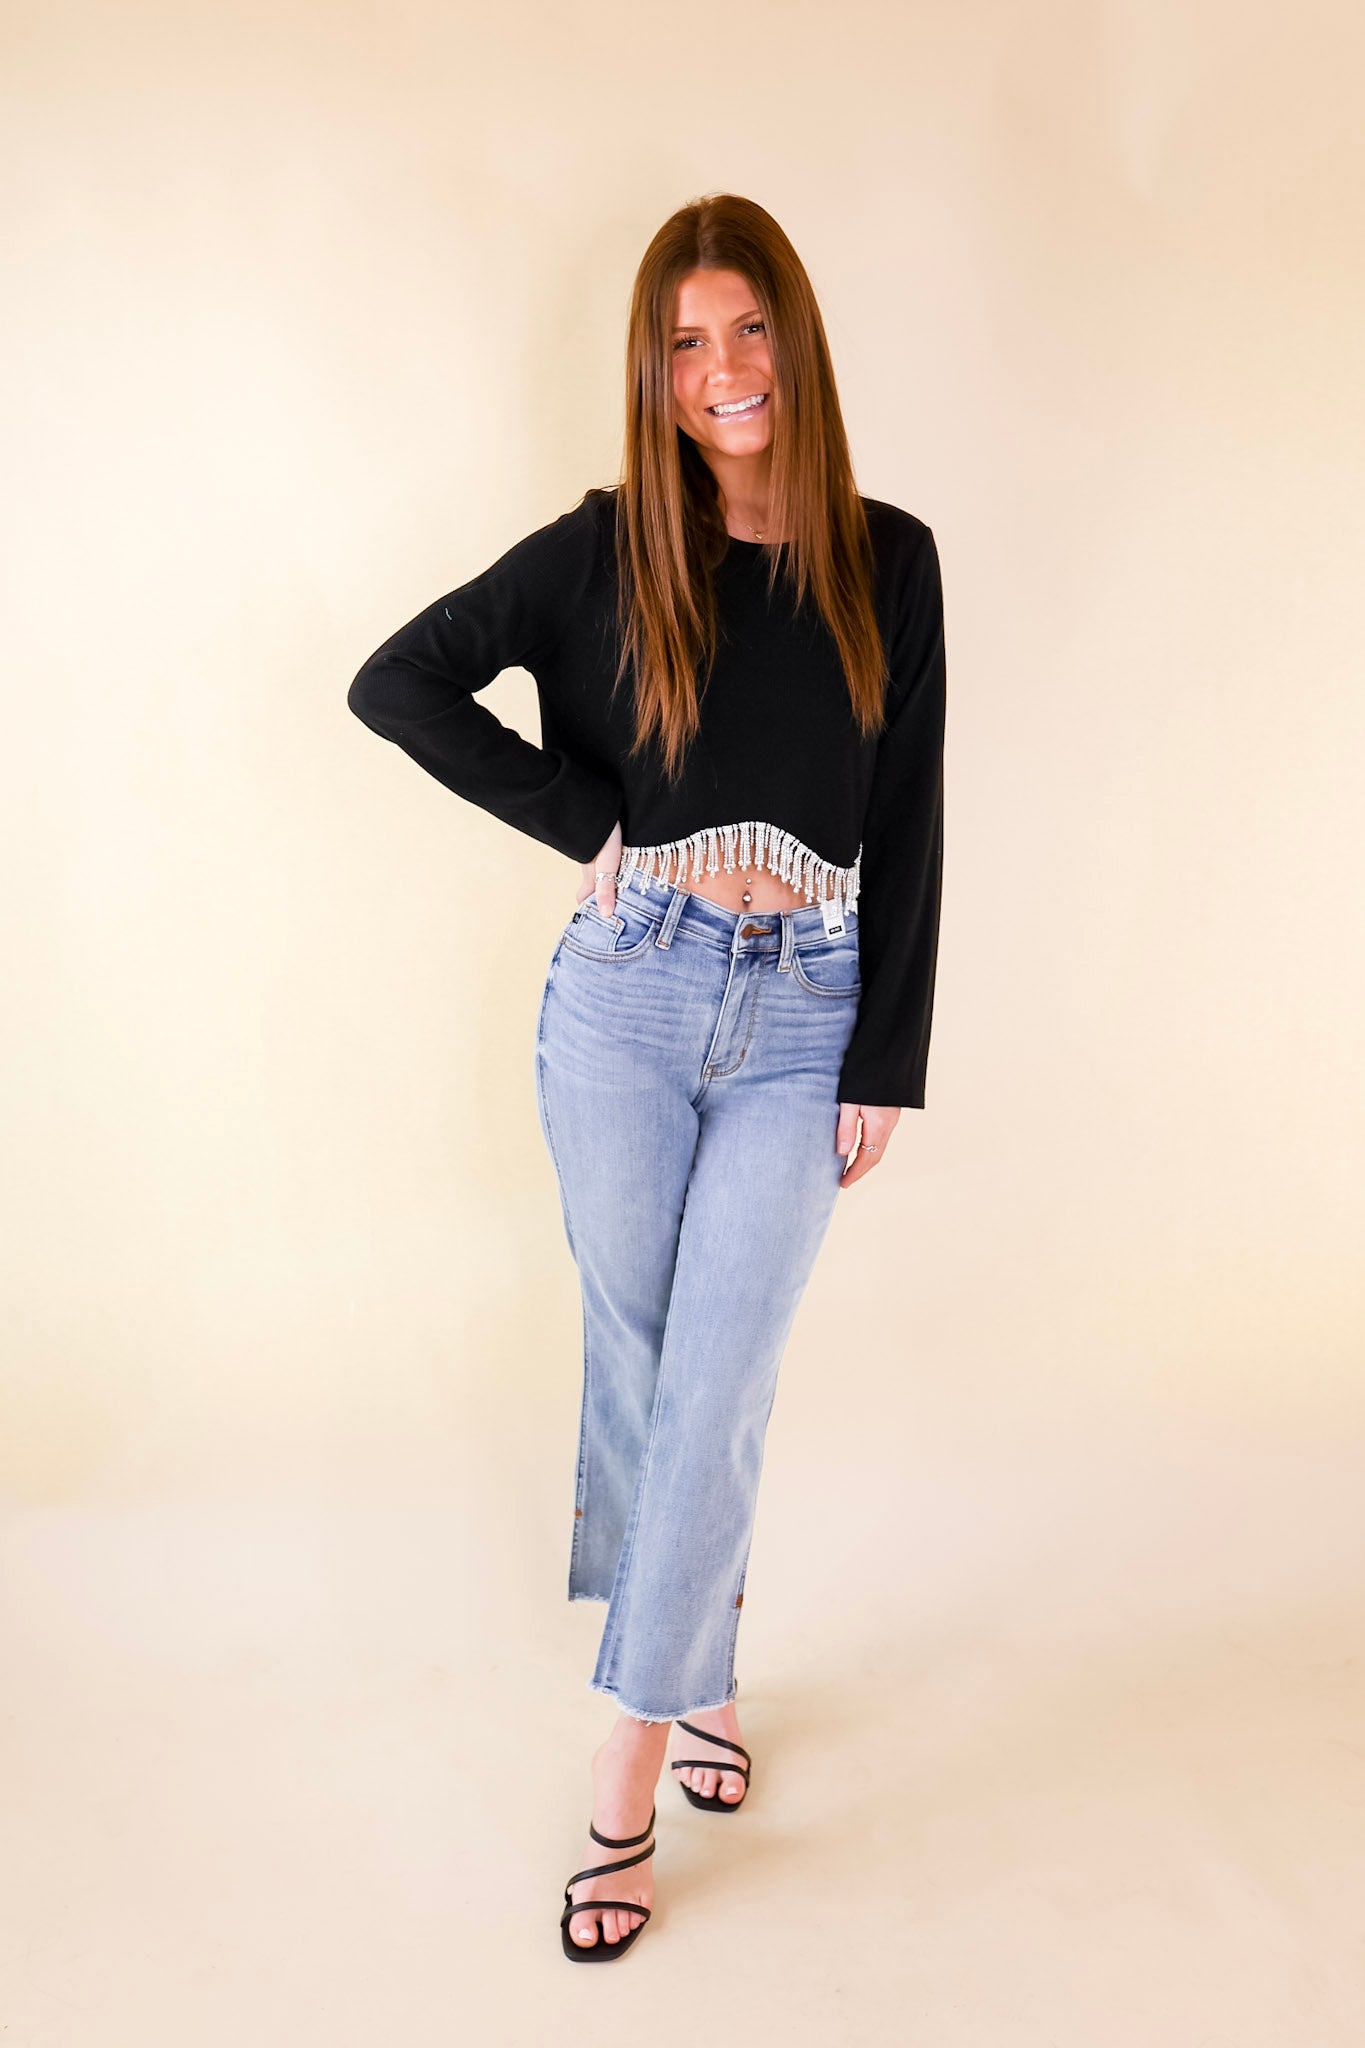 Signature Look Long Sleeve Crop Top with Crystal Fringe Trim in Black - Giddy Up Glamour Boutique